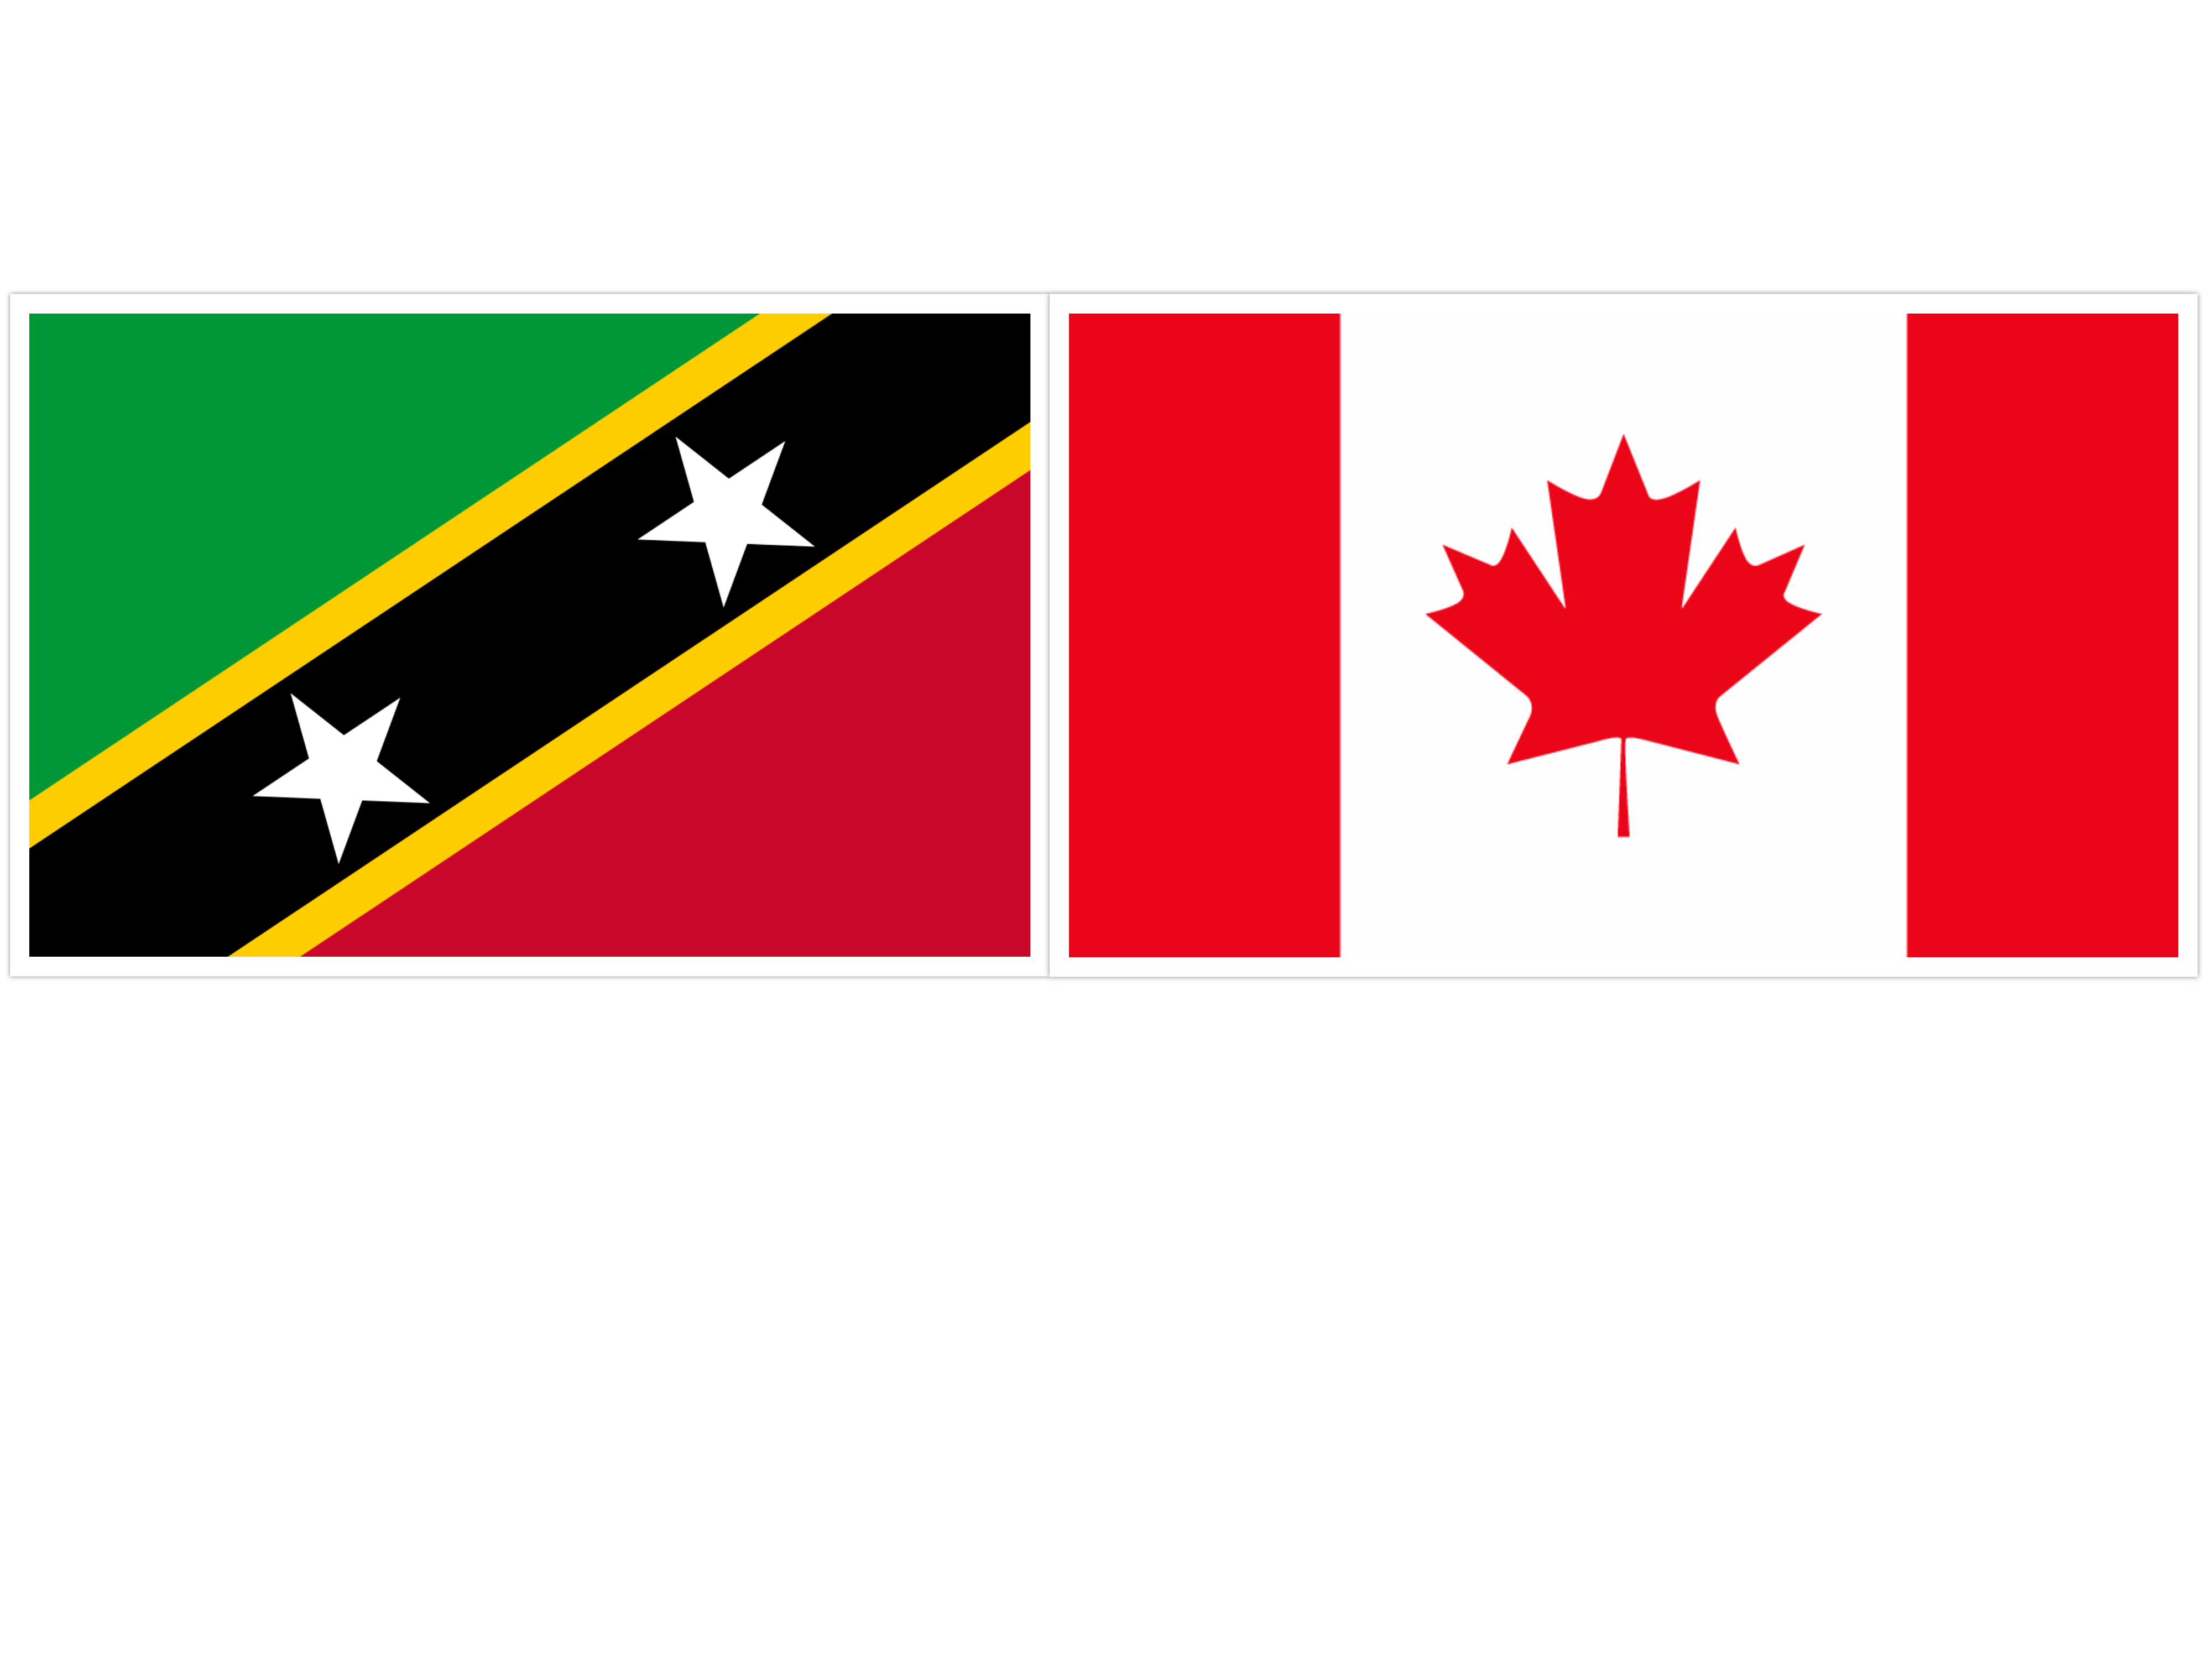 Travel to Canada now easier for Citizens of St. Kitts and Nevis